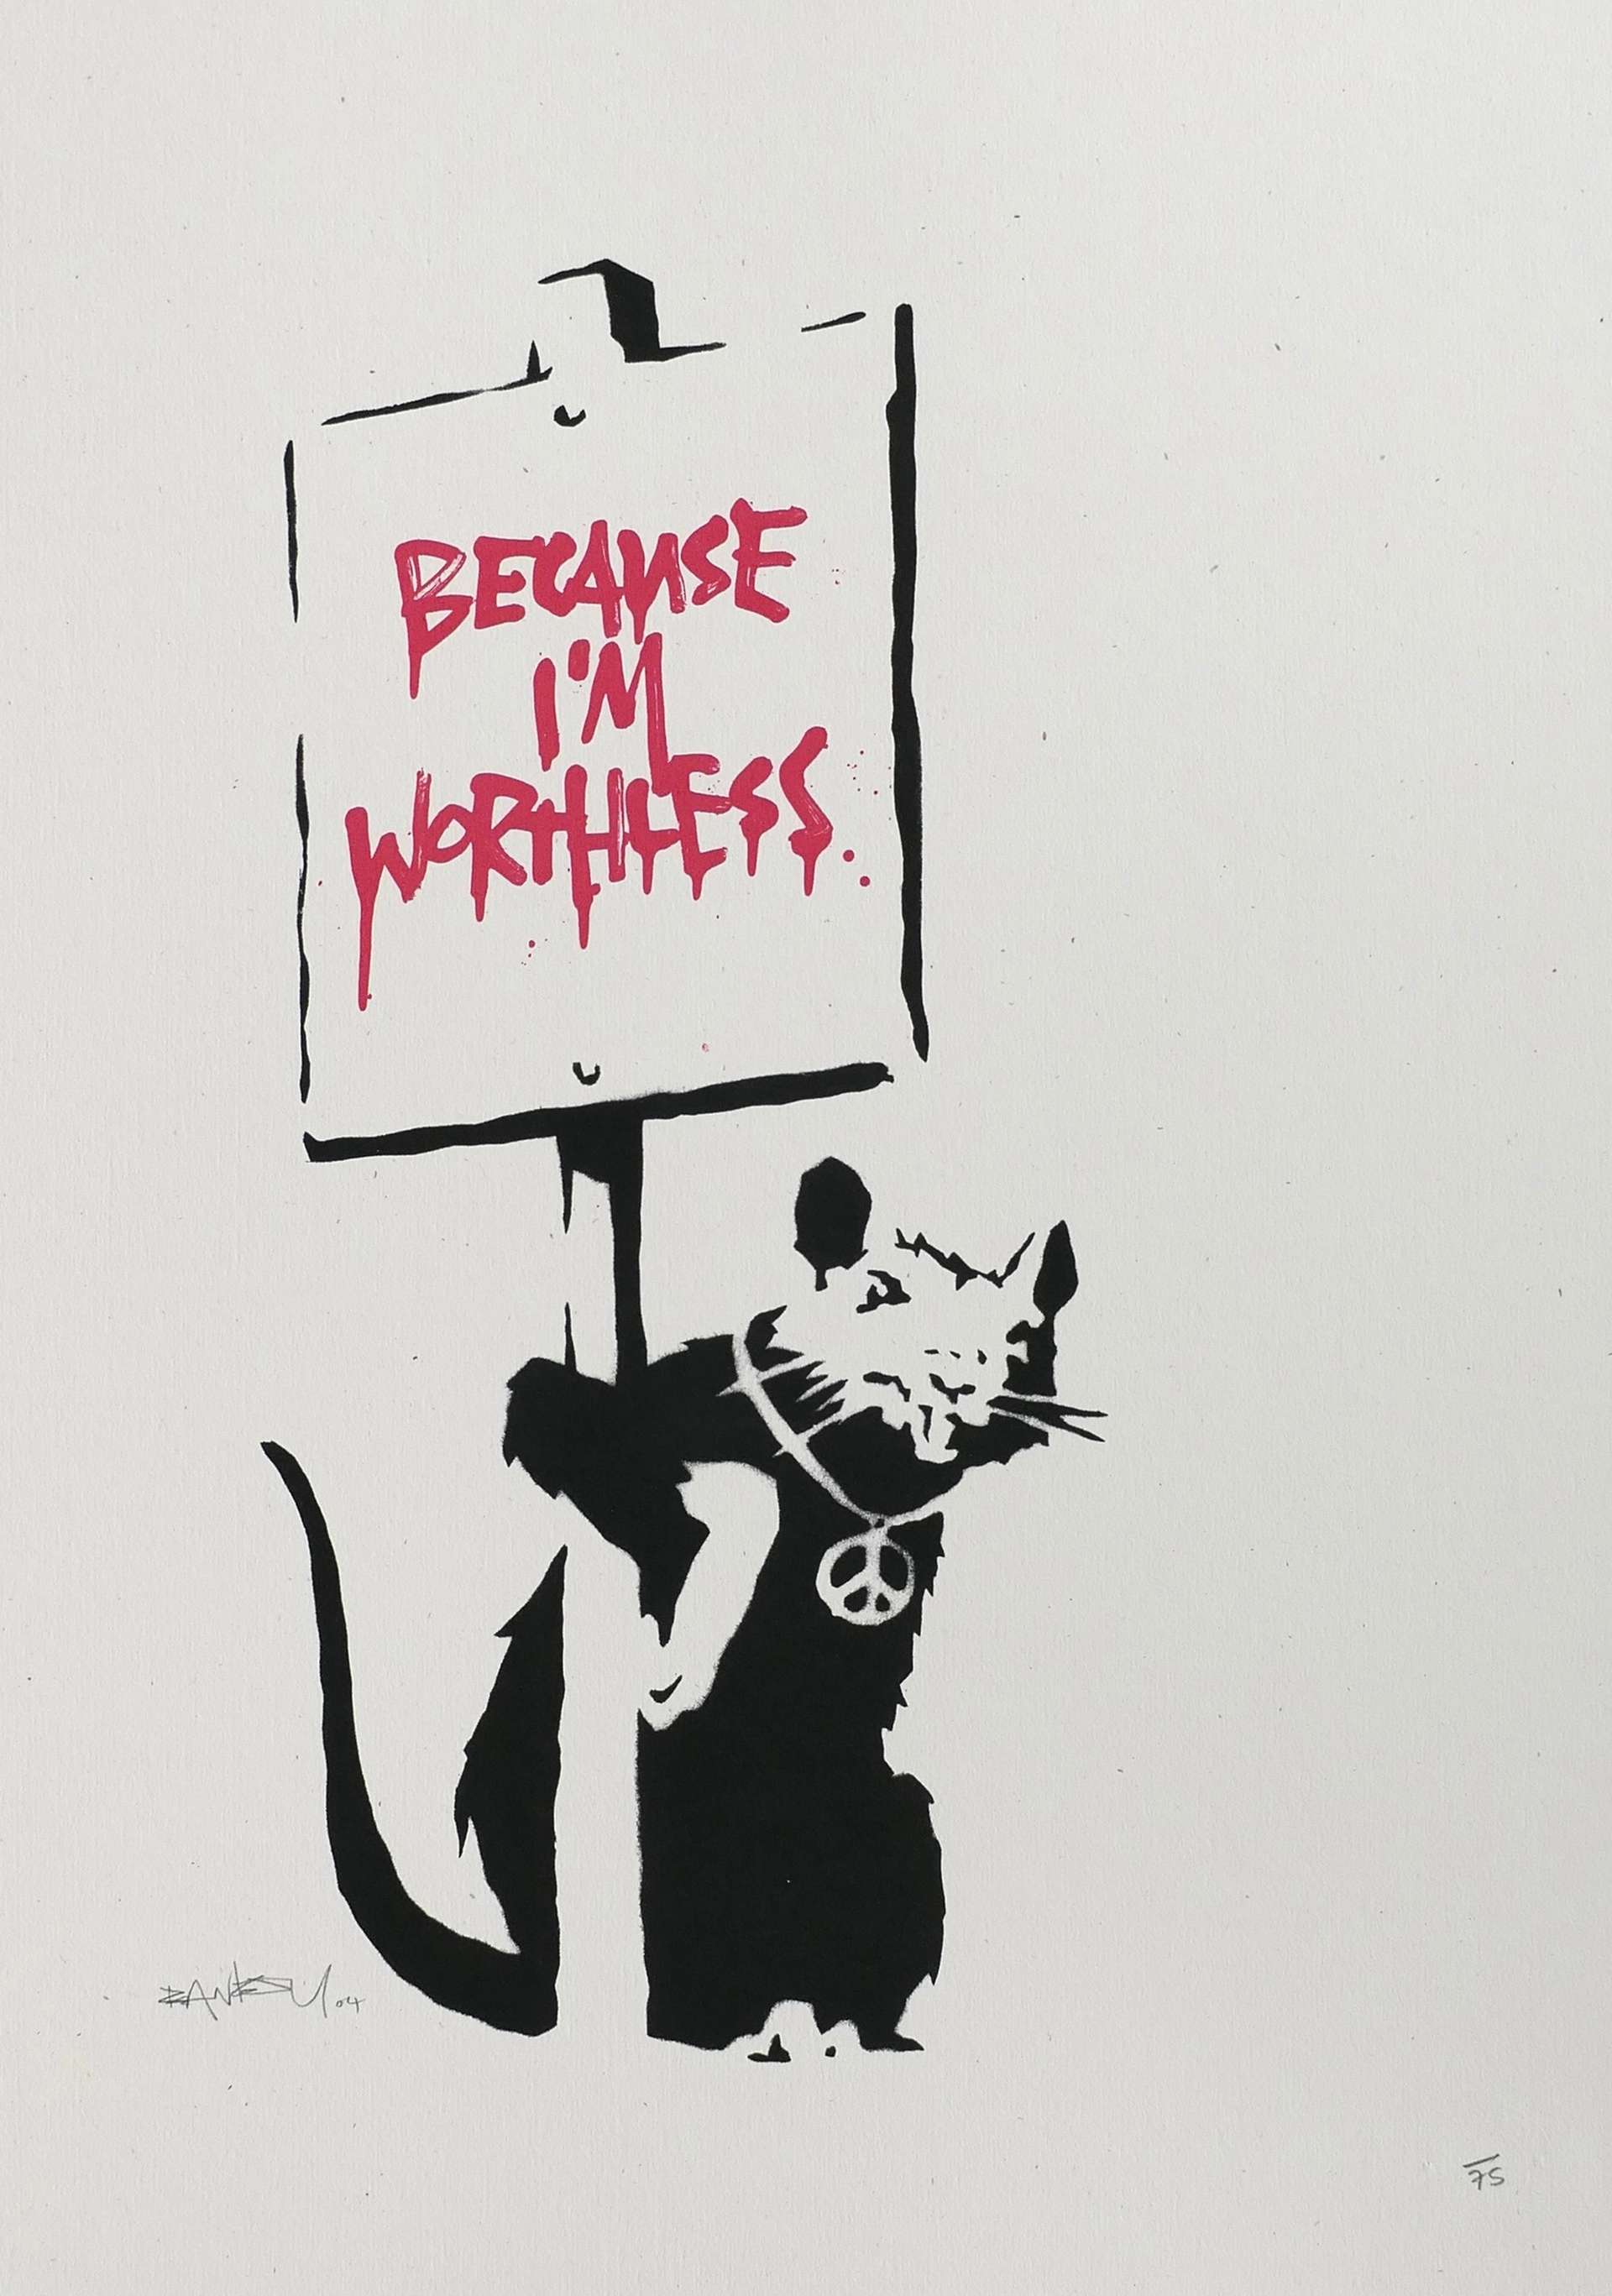 Because I'm Worthless by Banksy